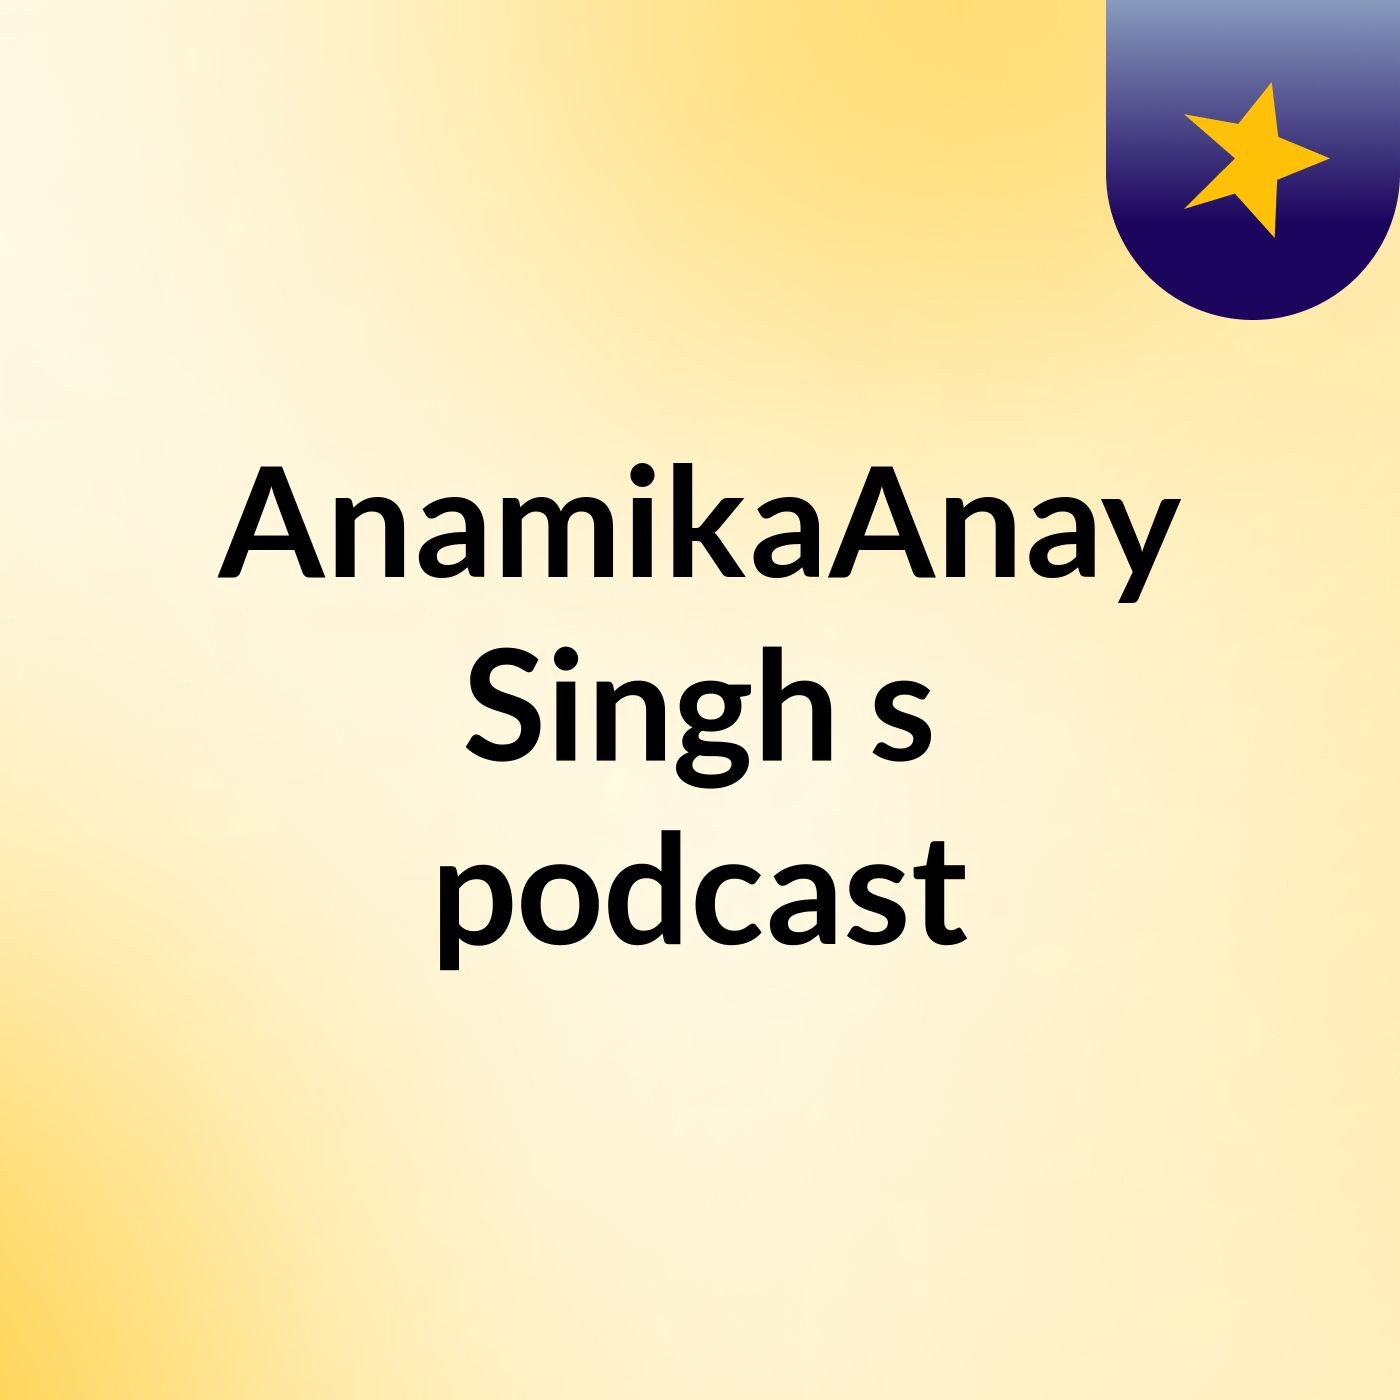 AnamikaAnay Singh's podcast